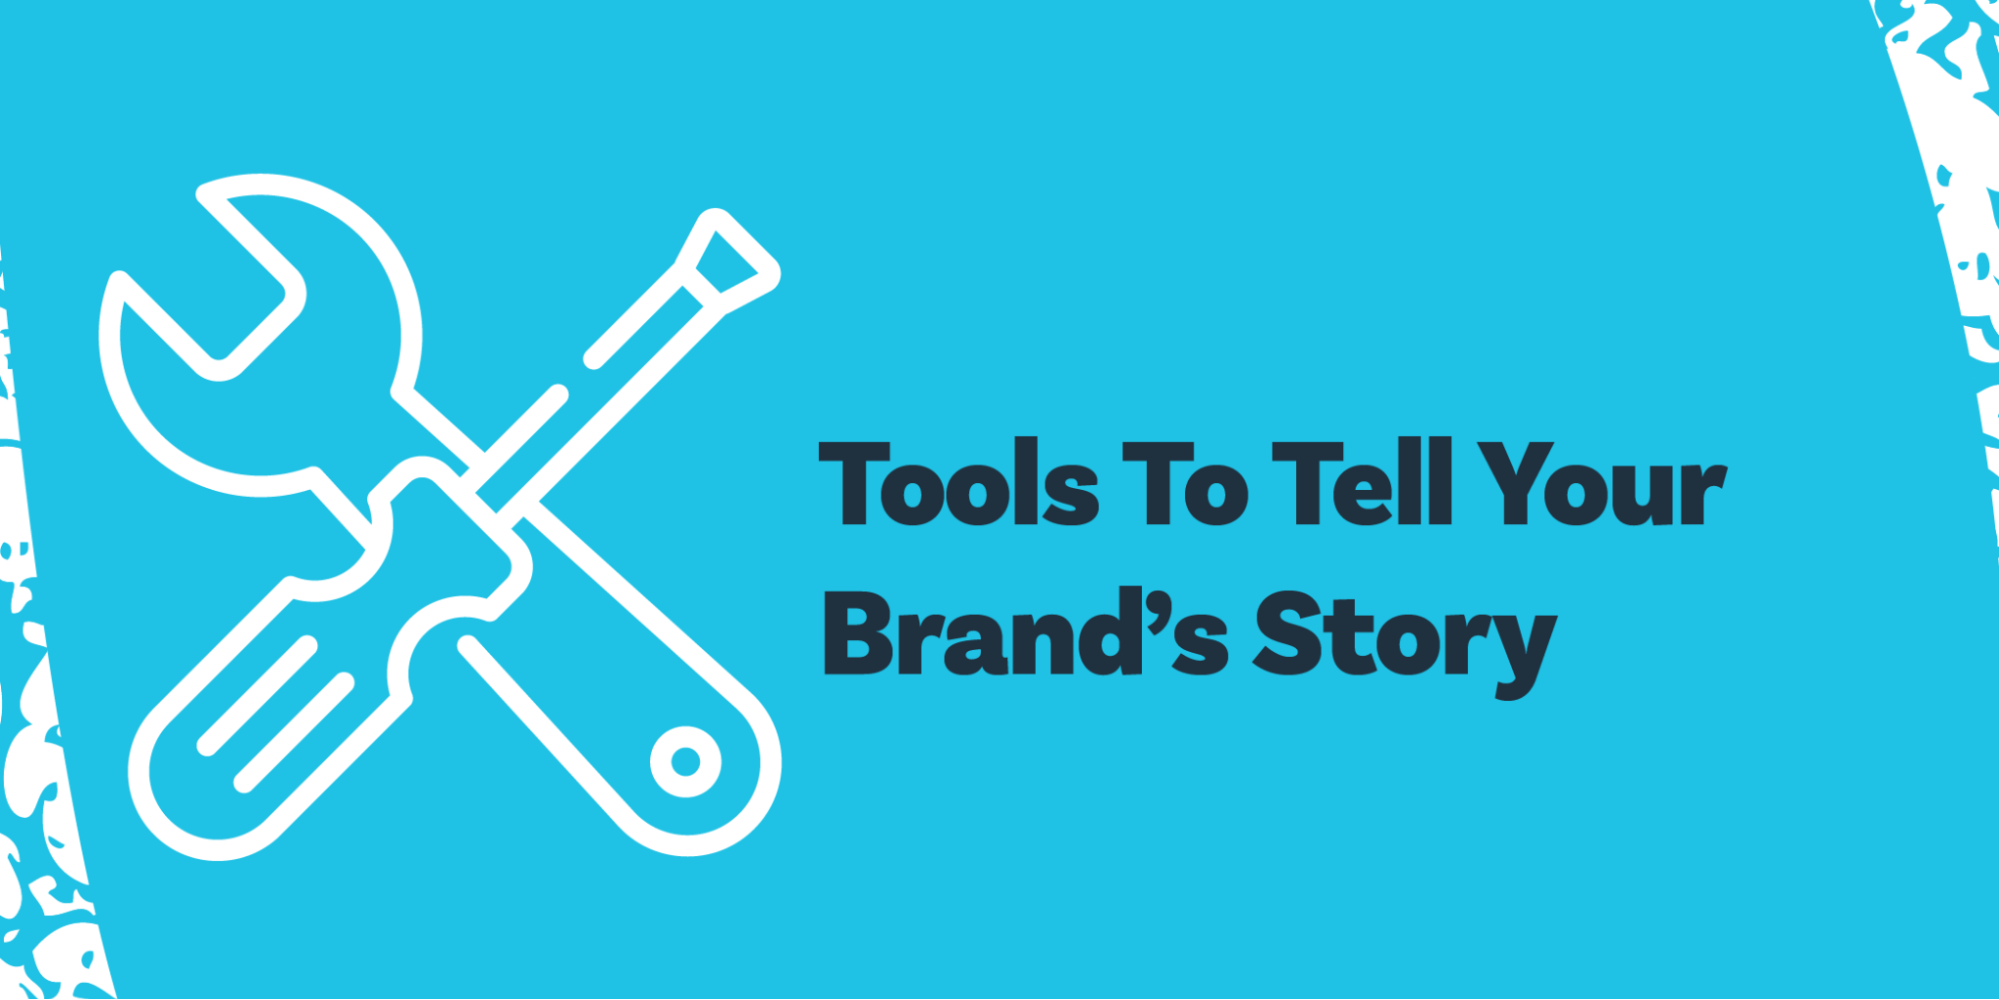 Tools To Tell Your Brand's Story